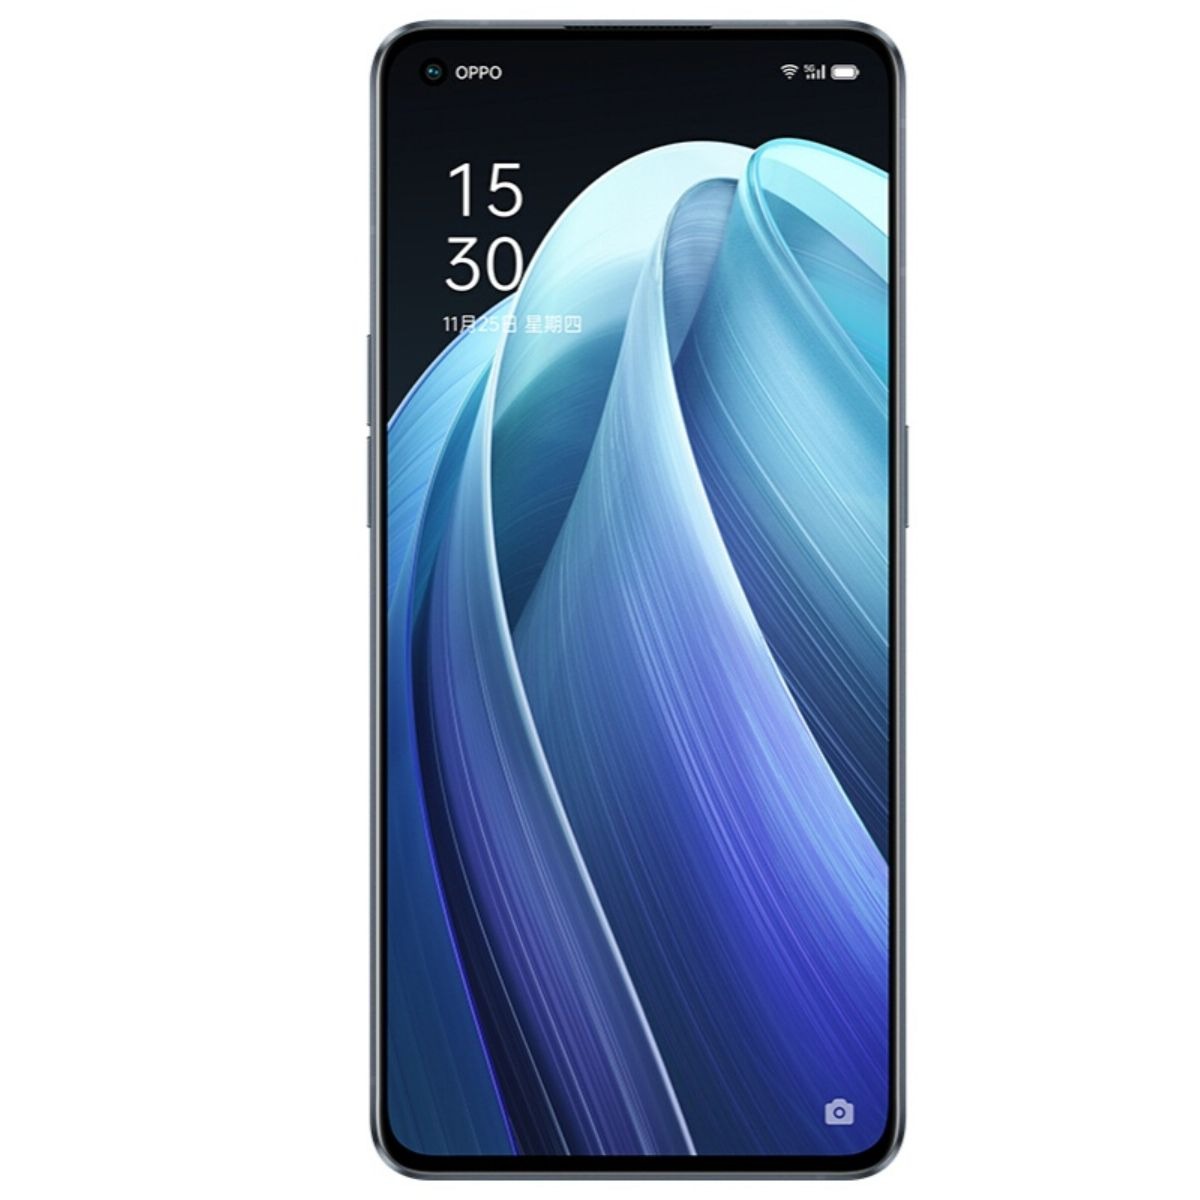  Oppo Reno6 Pro 5G Dual-SIM 256GB ROM + 12GB RAM (GSM Only  No  CDMA) Factory Unlocked Android Smartphone (Blue) - International Version :  Cell Phones & Accessories